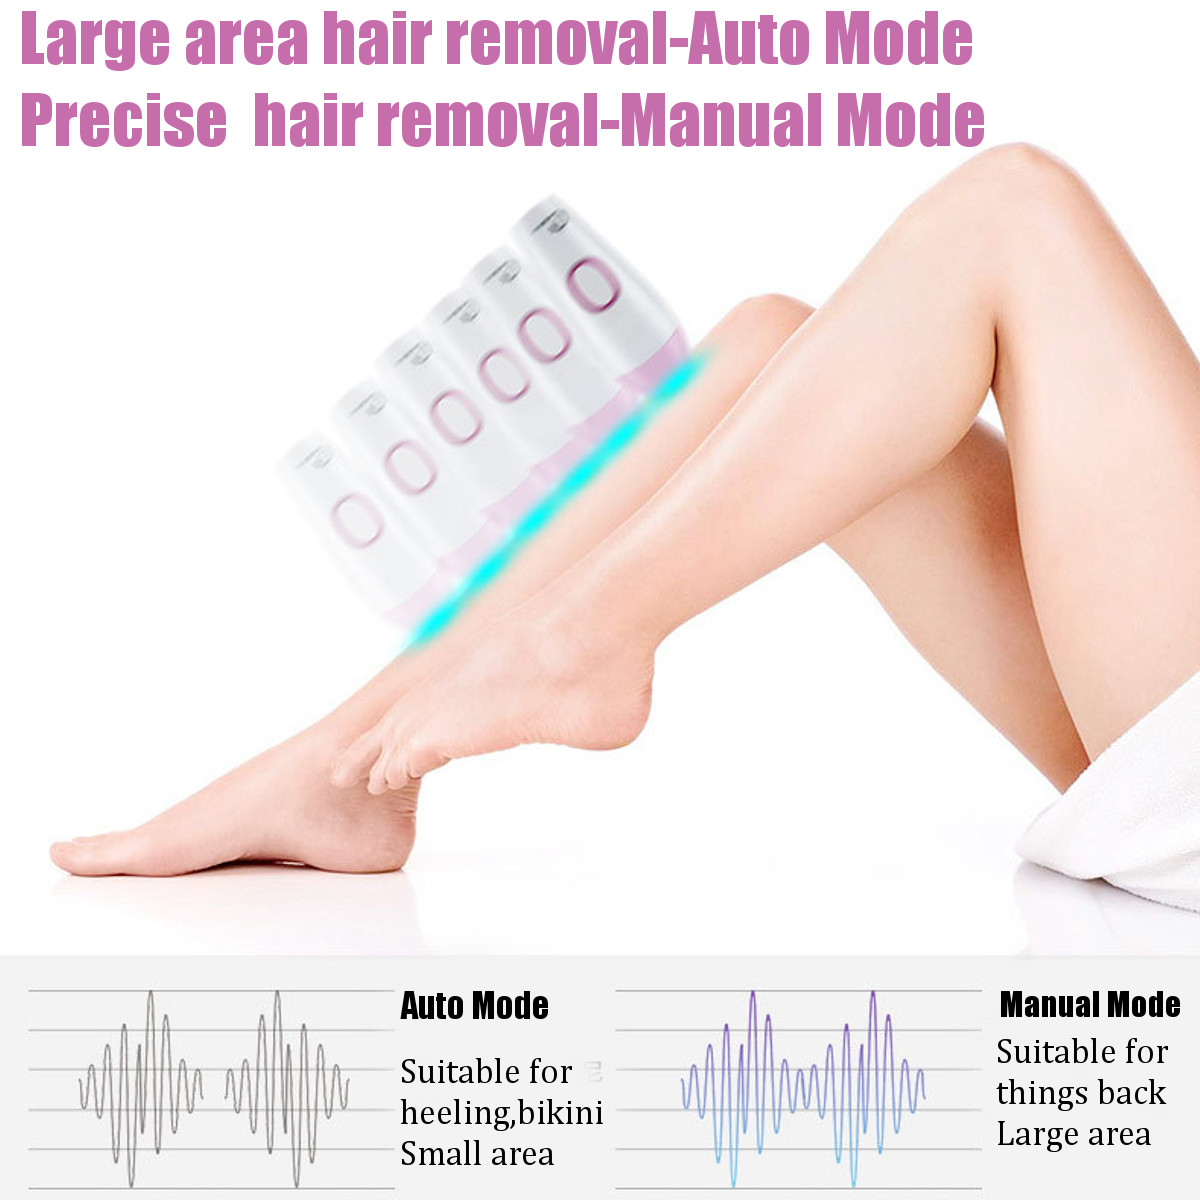 100-240V-300000-Pulses-IPL-Permanent-Hair-Laser-Removal-for-Body-Face-Home-Use-Device-Depilatory-Epi-1433342